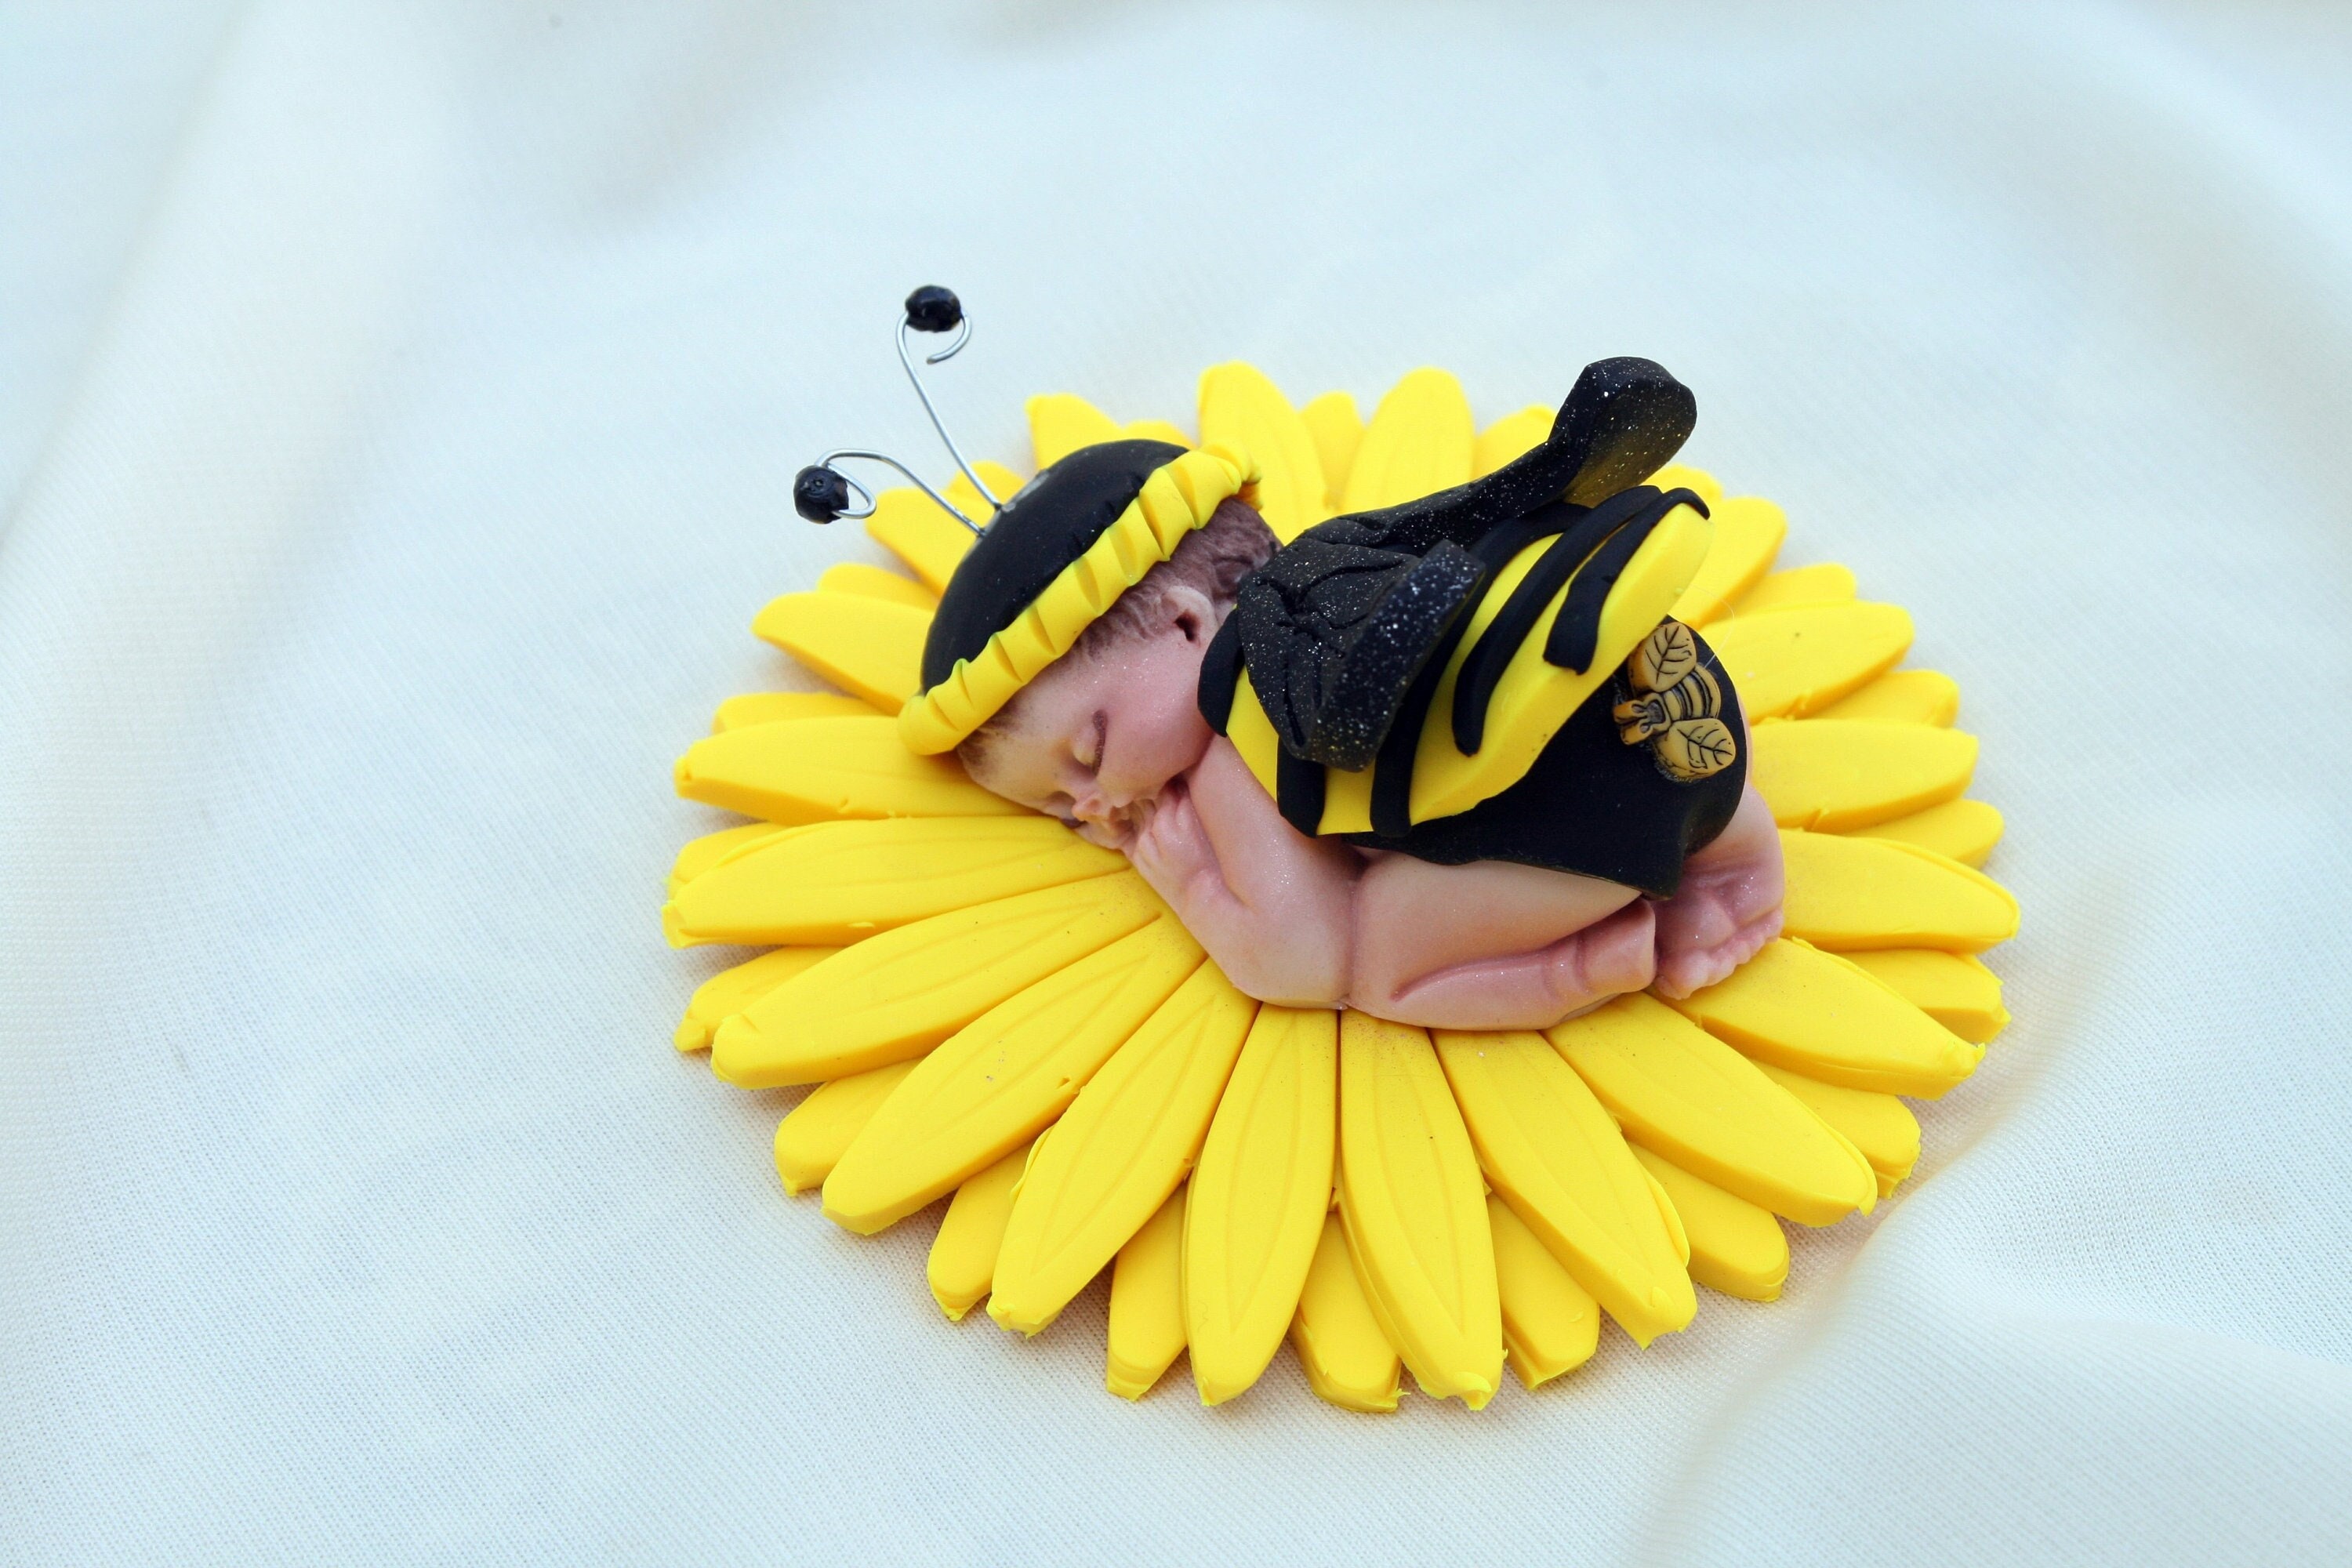 Bumble Bee Sugars Little Yellow Sugar Bee Cake Toppers, Edible Bumble Bee  Cupcake Decorations, Yellow Honey Bee Cake Cake Decorations 